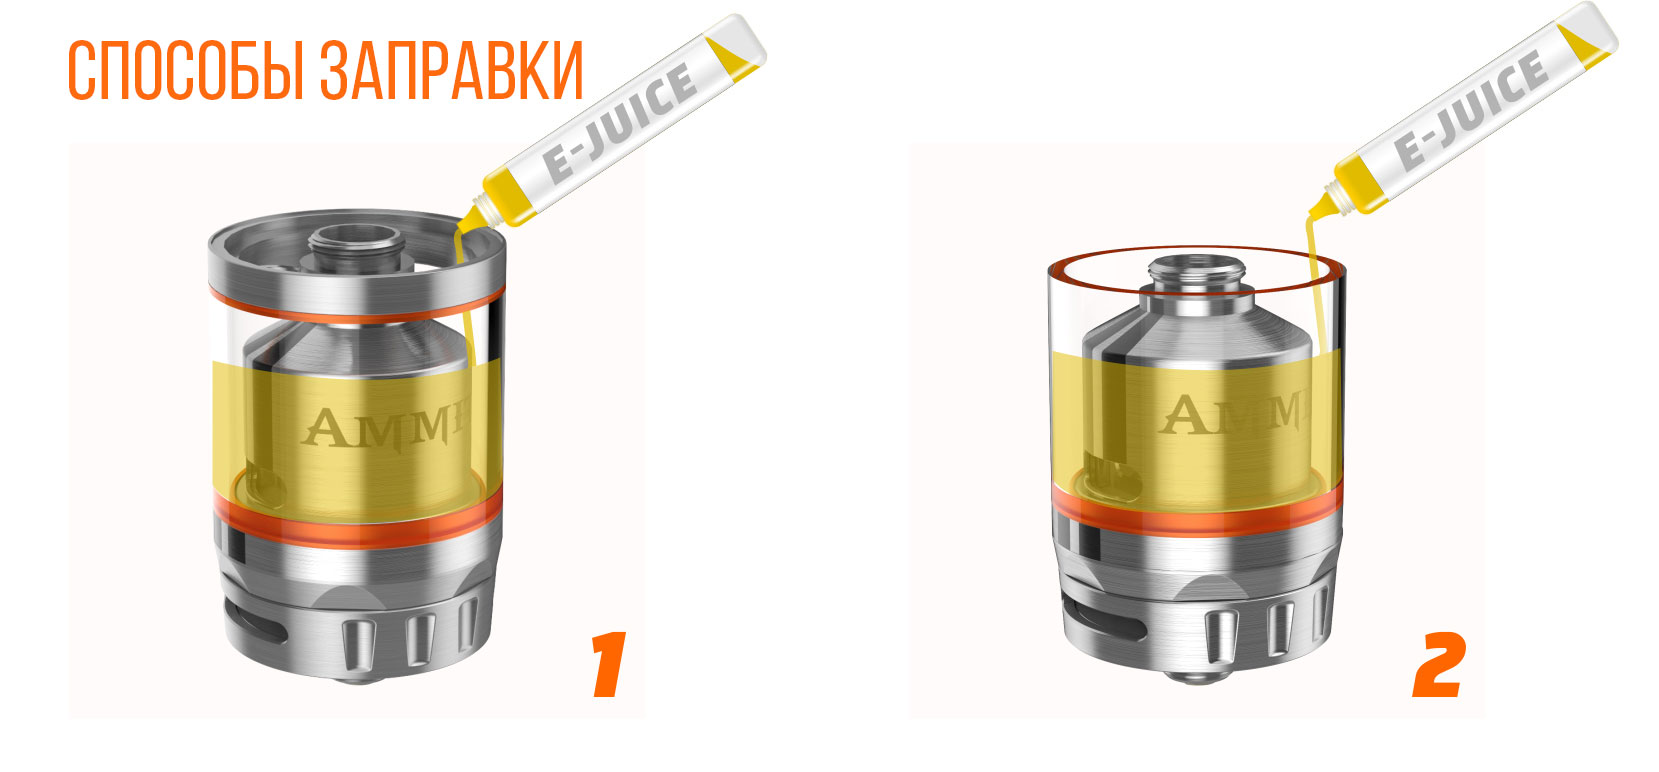 AMMIT dual coil rta two refilling ways new